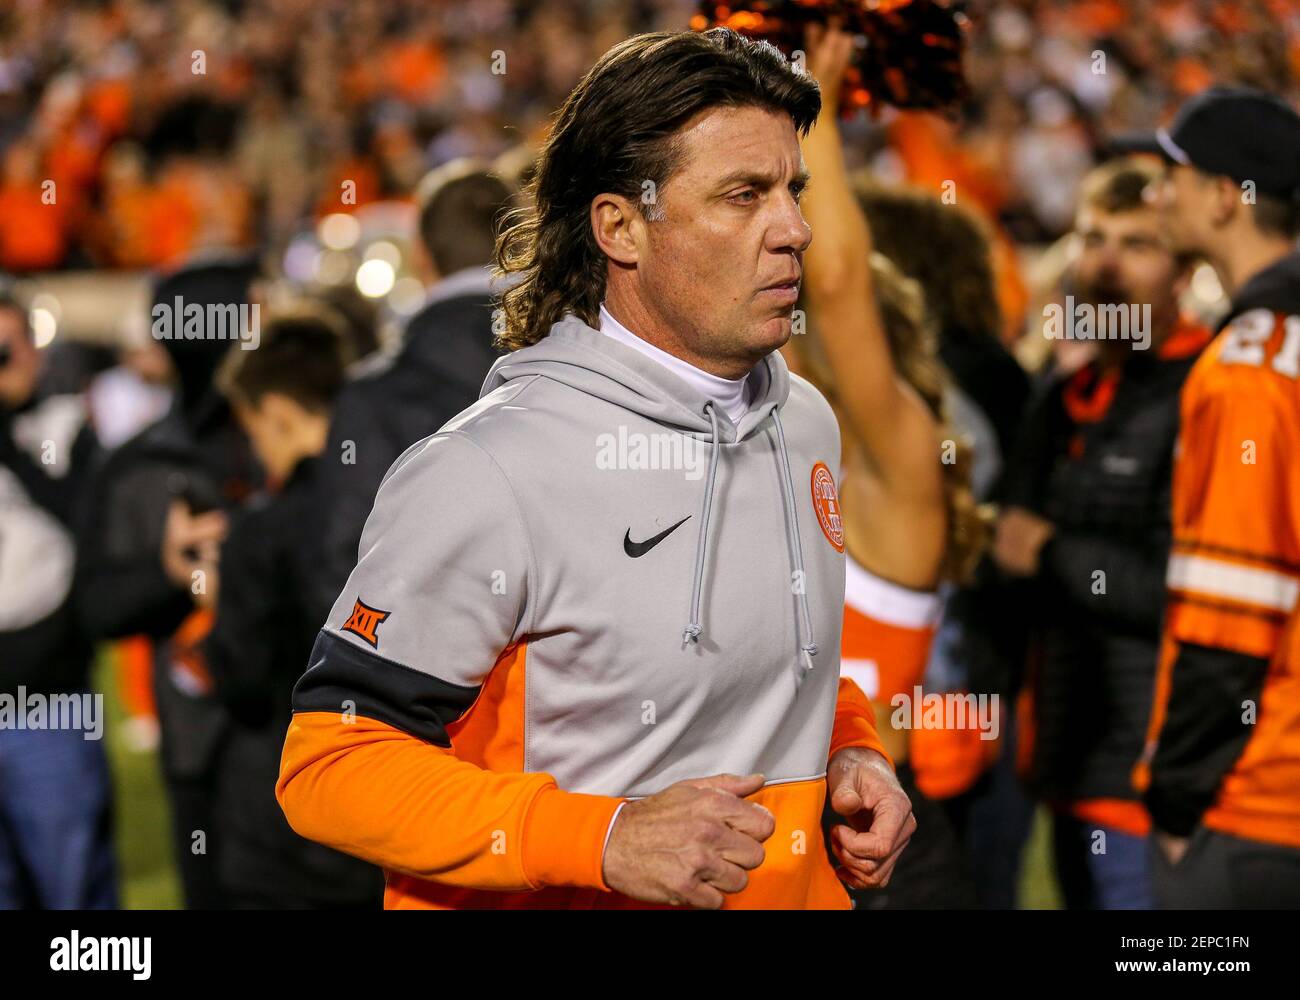 November 30, 2019: Oklahoma State Head Coach Mike Gundy takes the field  before a football game between the University of Oklahoma Sooners and the  Oklahoma State Cowboys at Boone Pickens Stadium in